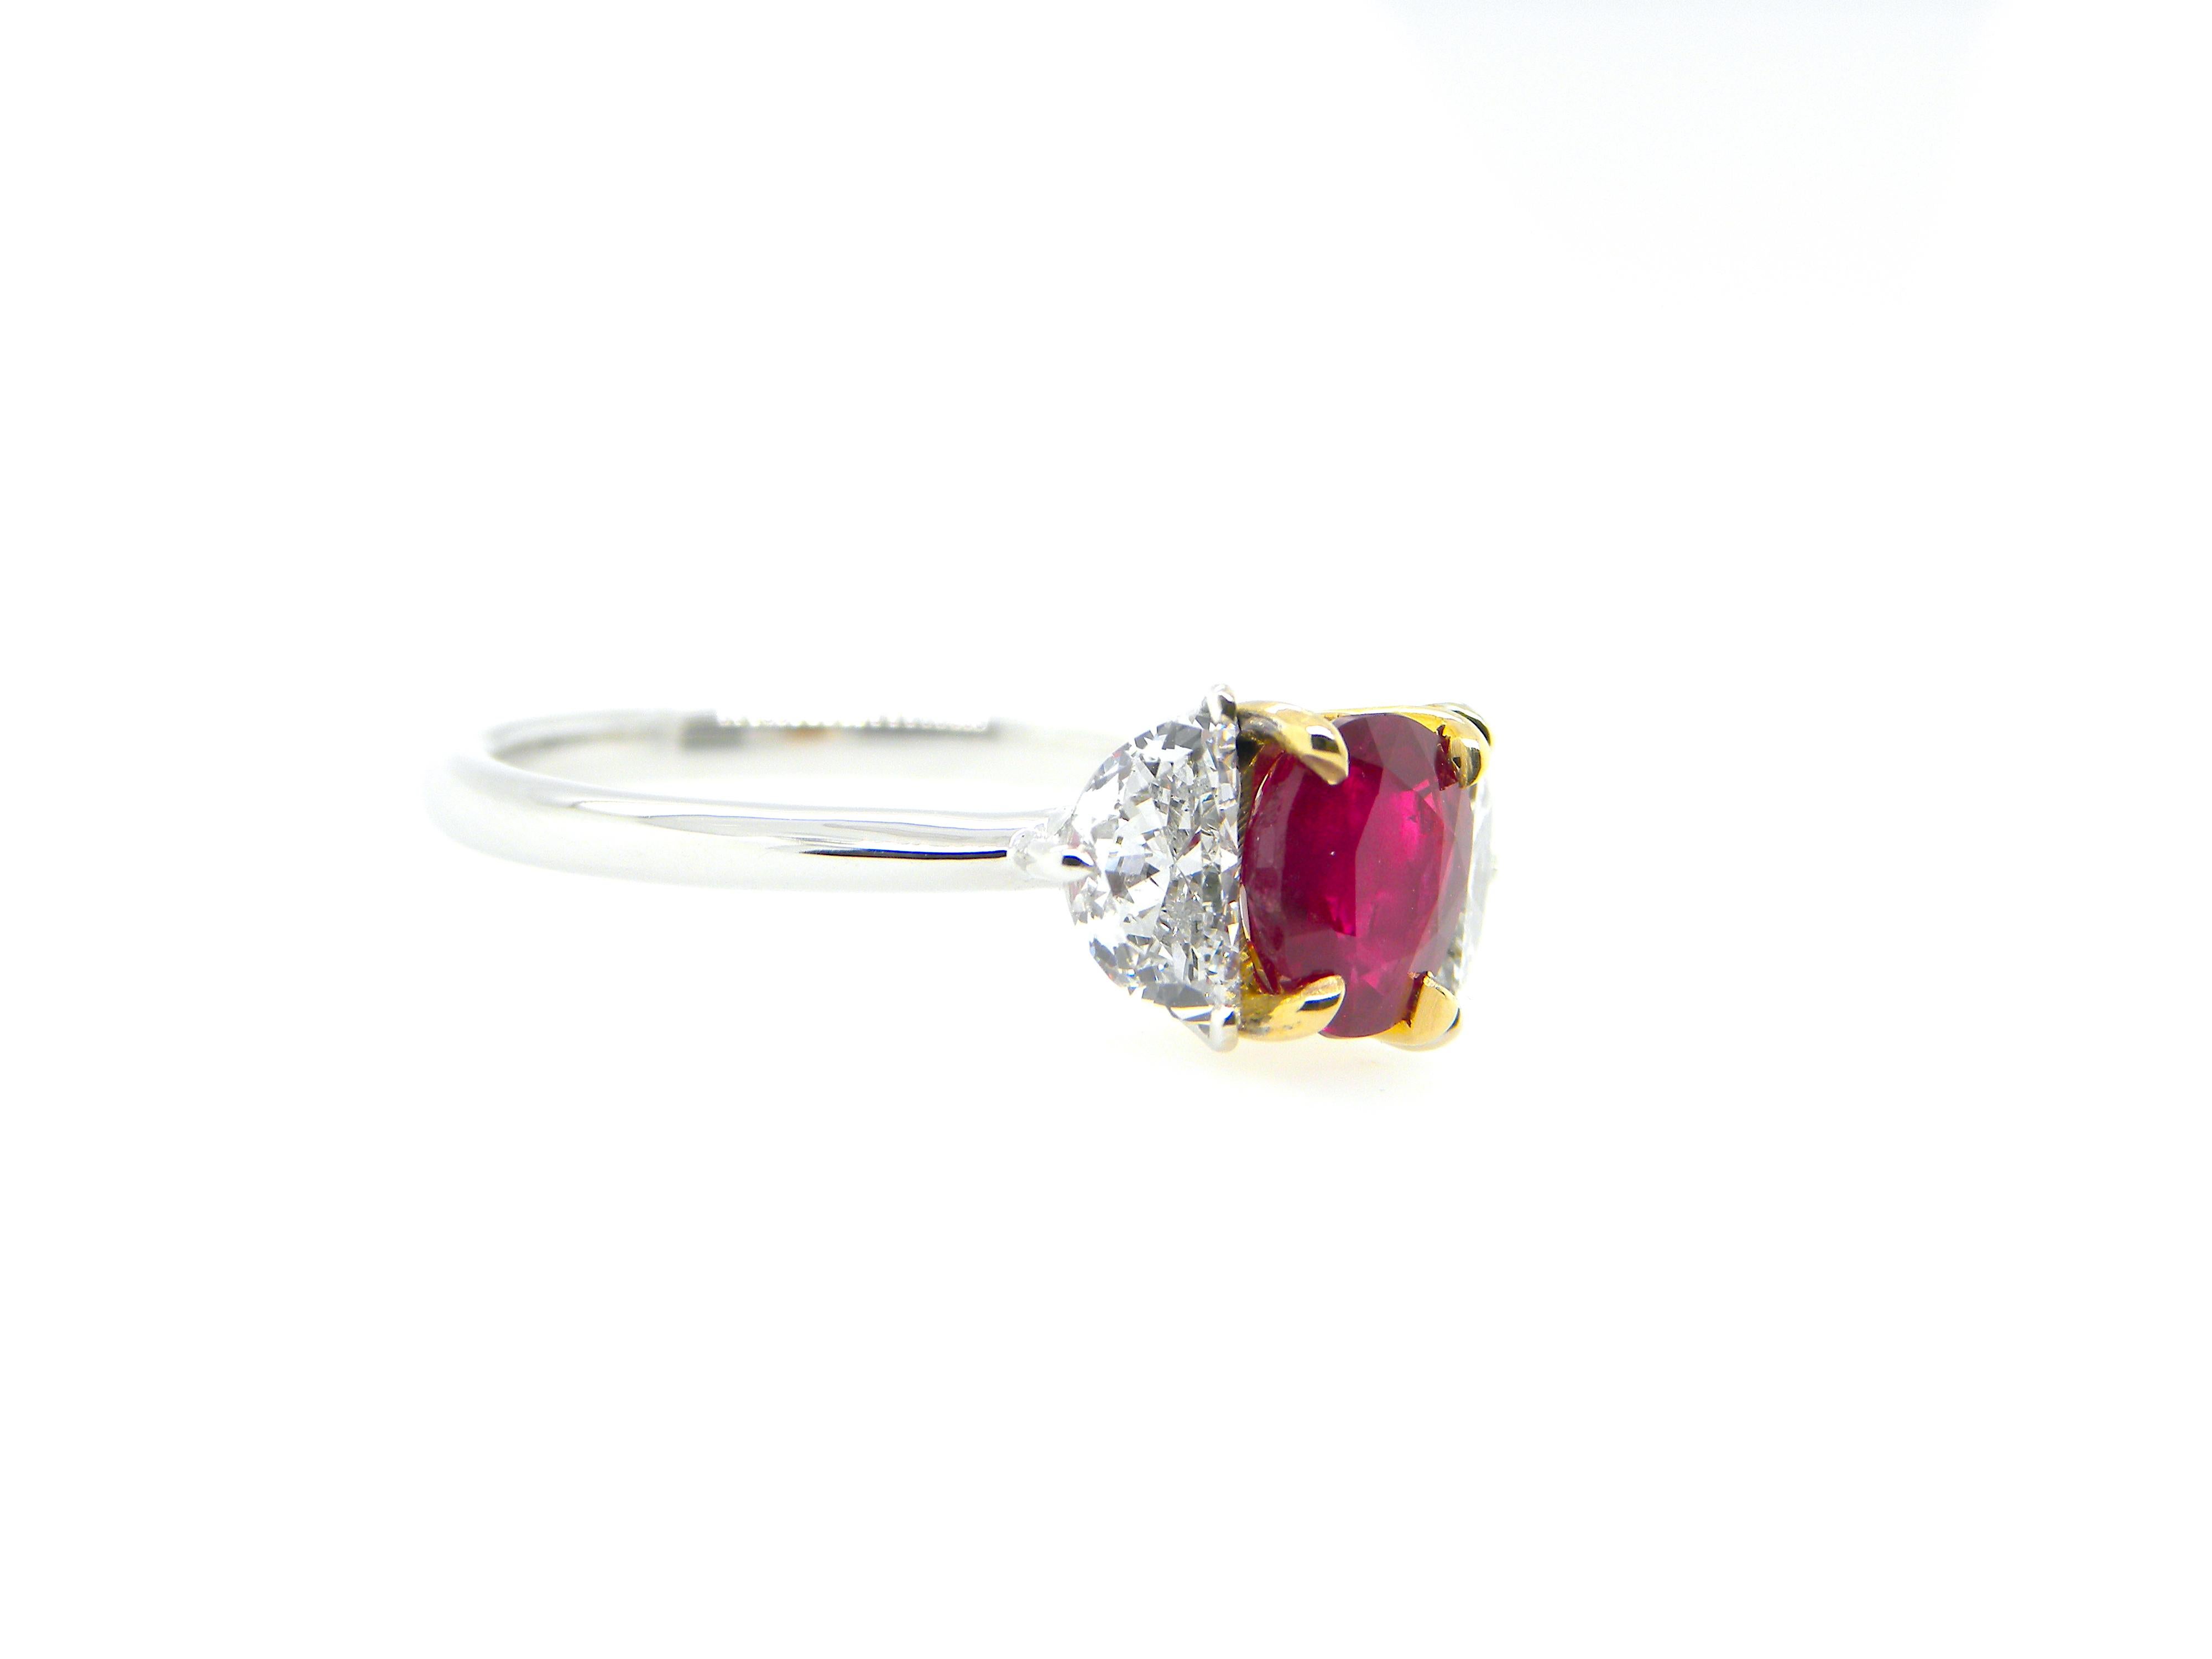 Women's or Men's 1.08 Carat GIA Certified Burma No Heat Pigeon's Blood Red Ruby and Diamond Ring